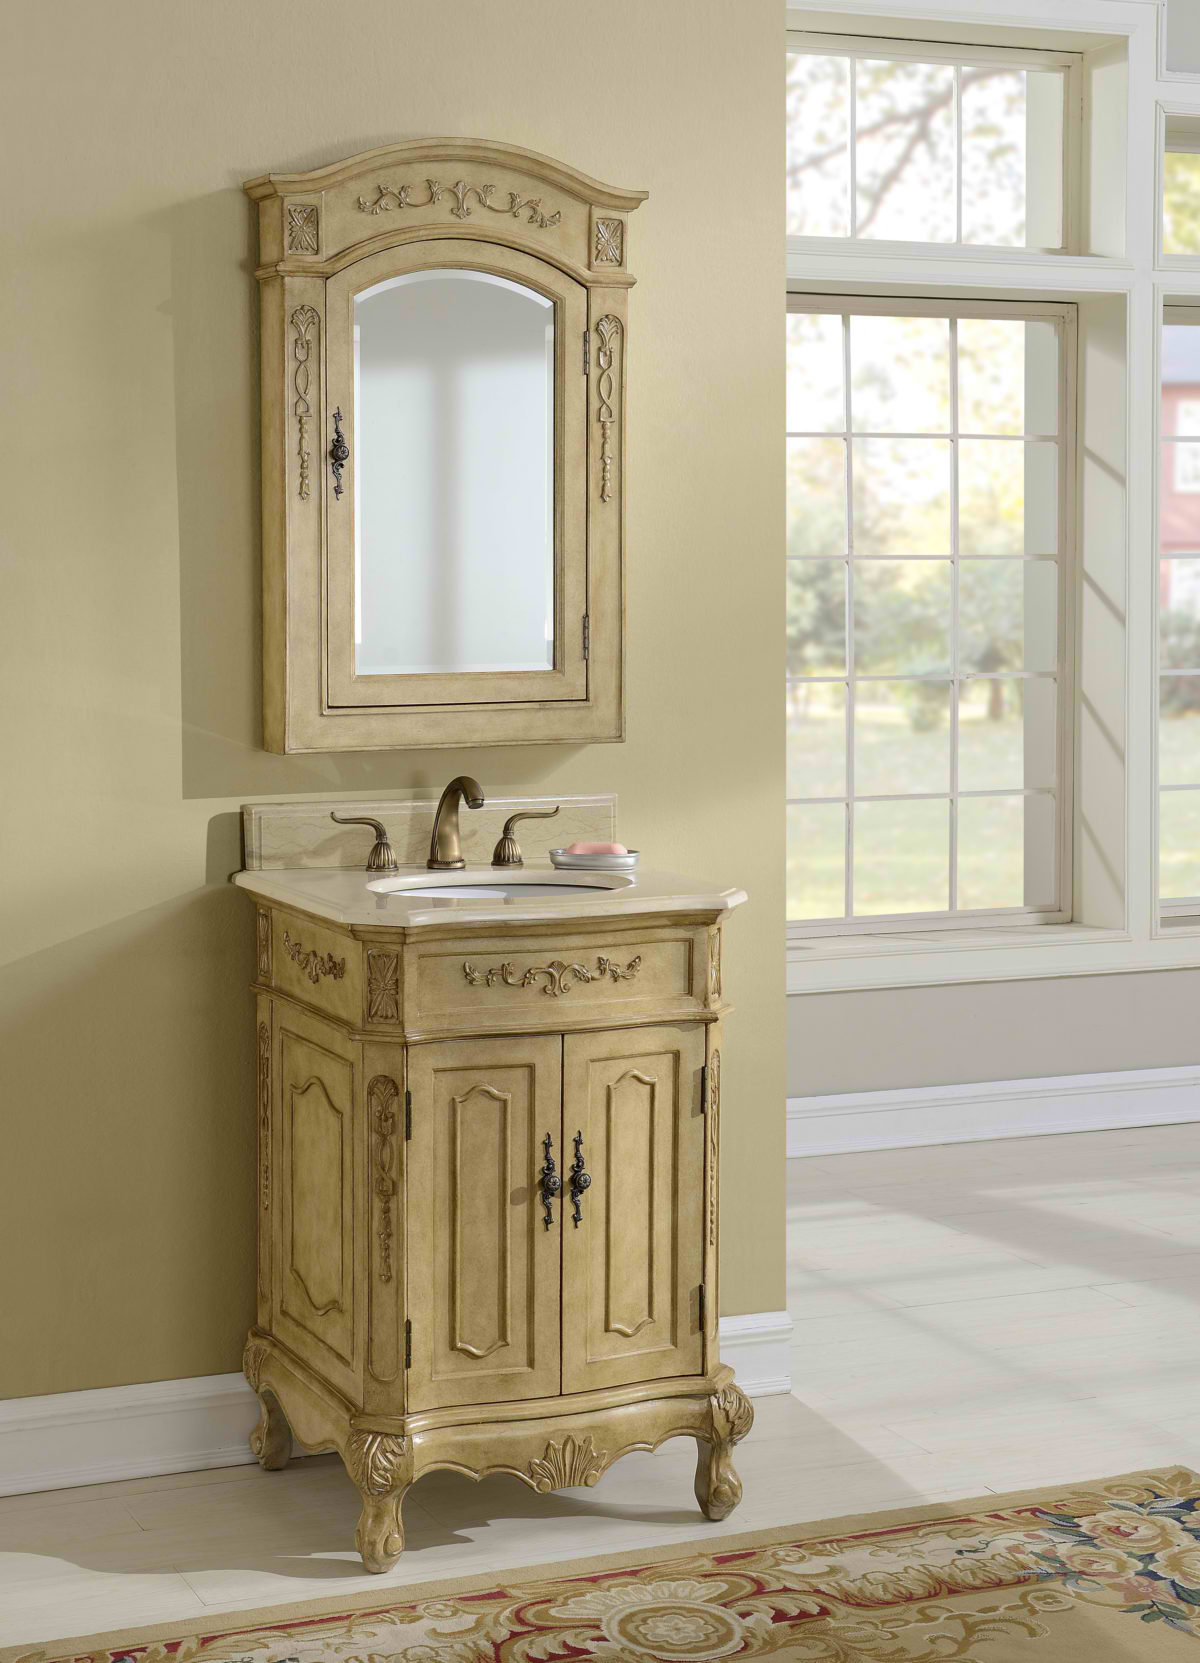 24" Antique Tan Finish Vanity with Mirror, Med Cab, and Linen Cabinet Options